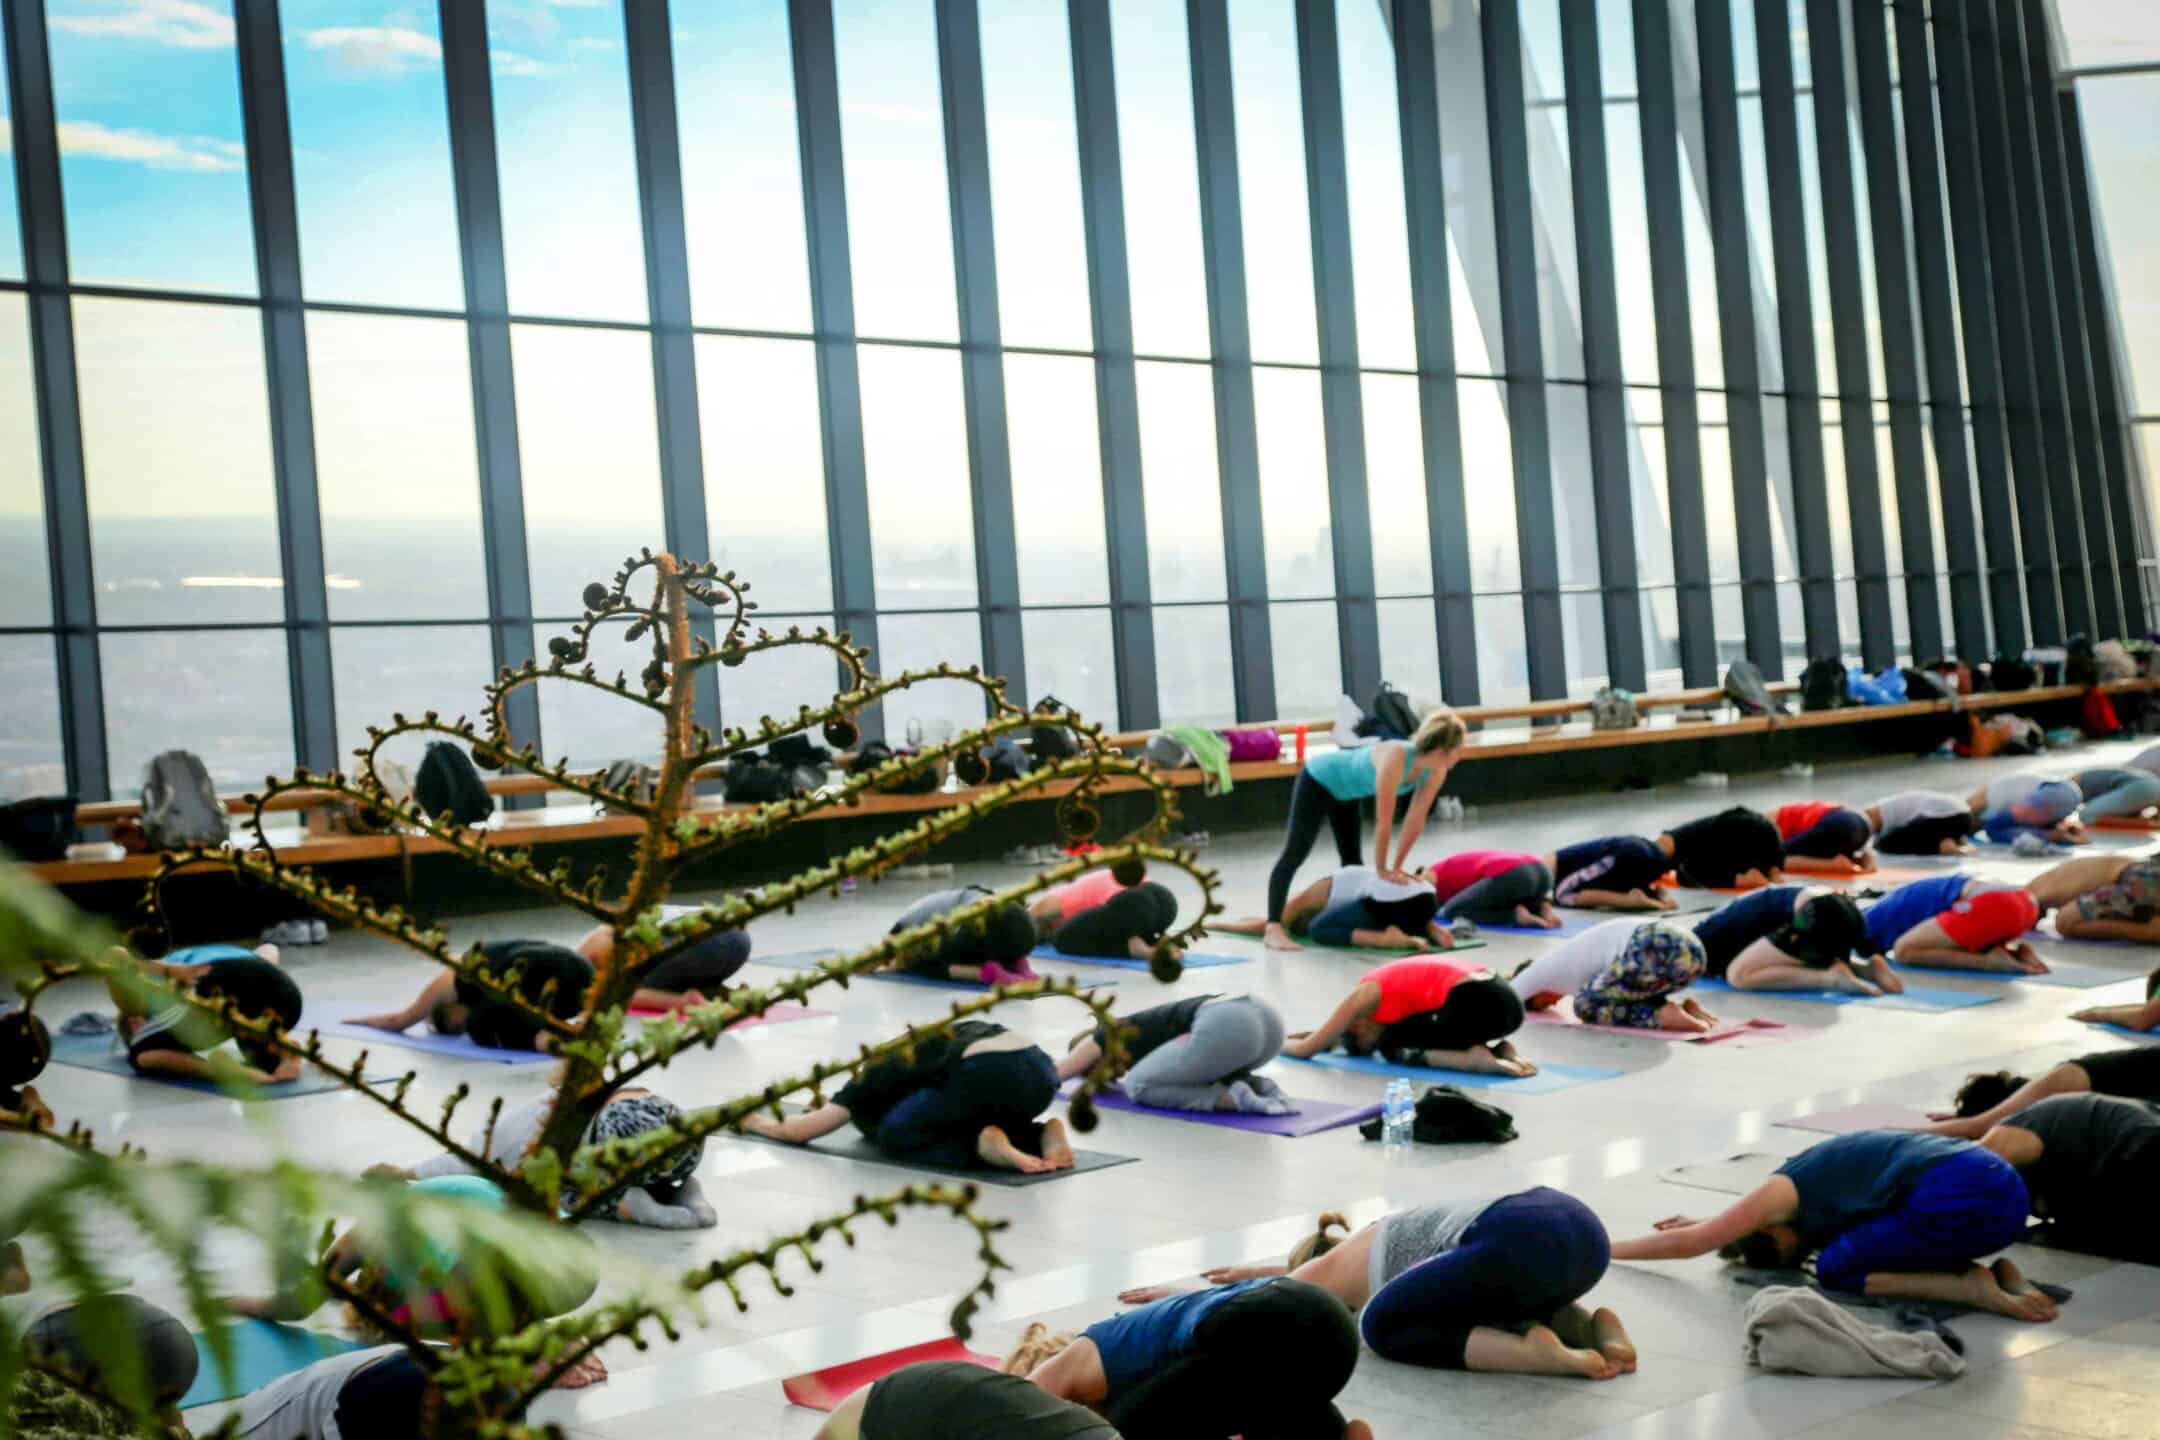 The Fit List: Yoga at the Natural History Museum this April